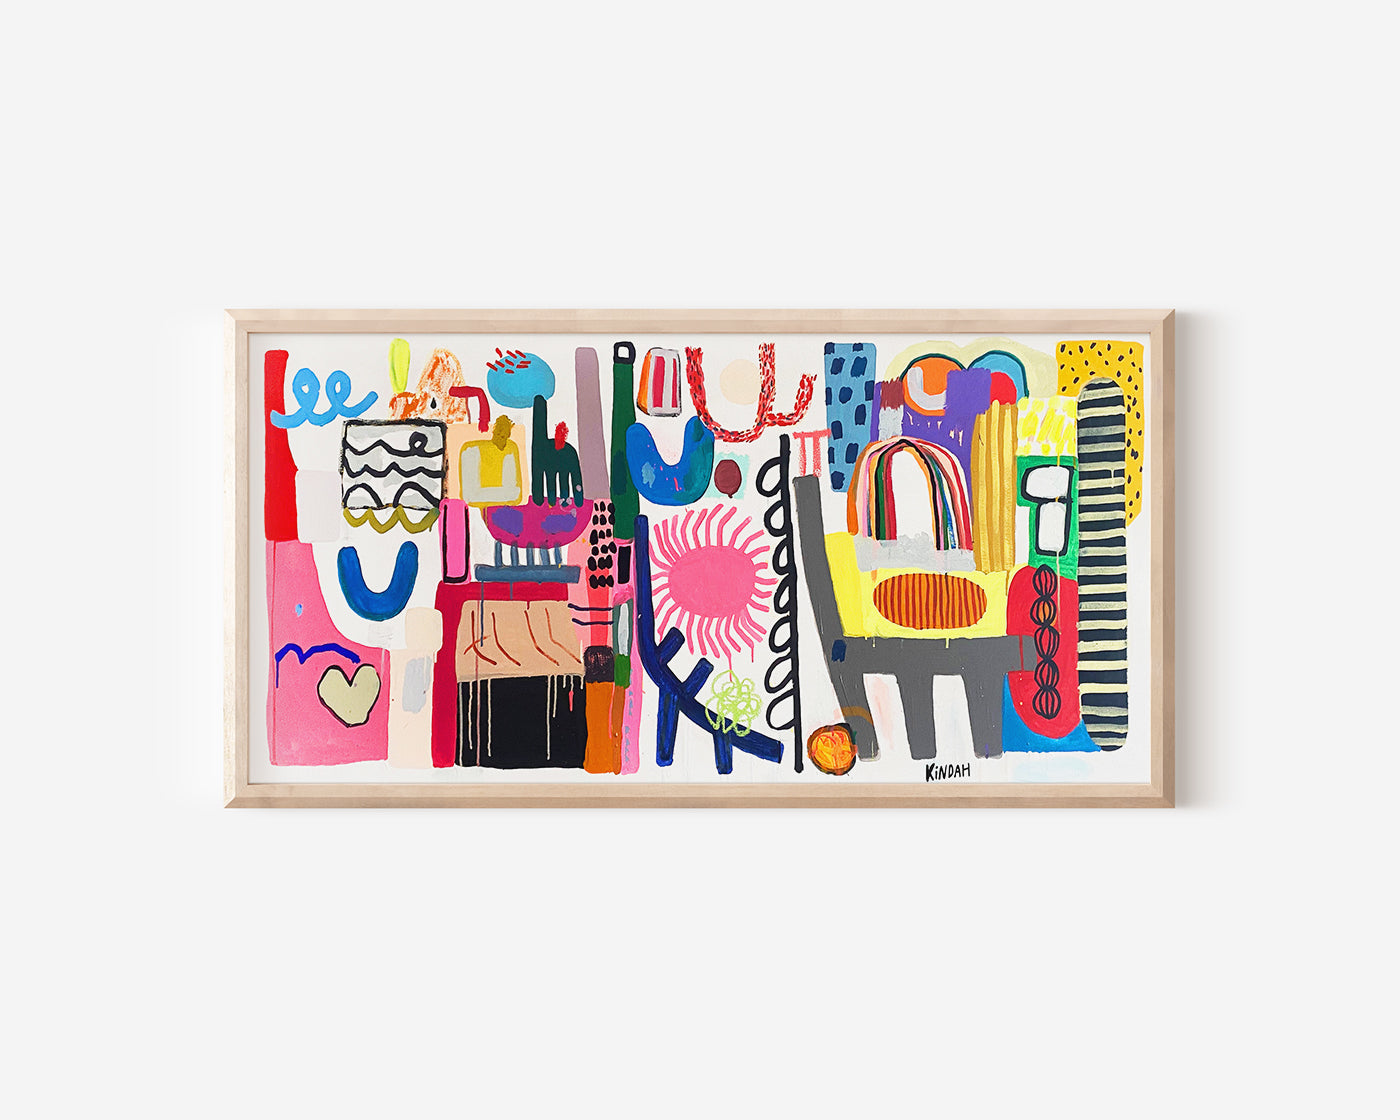 IMPERFECT "Organic City" - Limited Edition Giclee Print